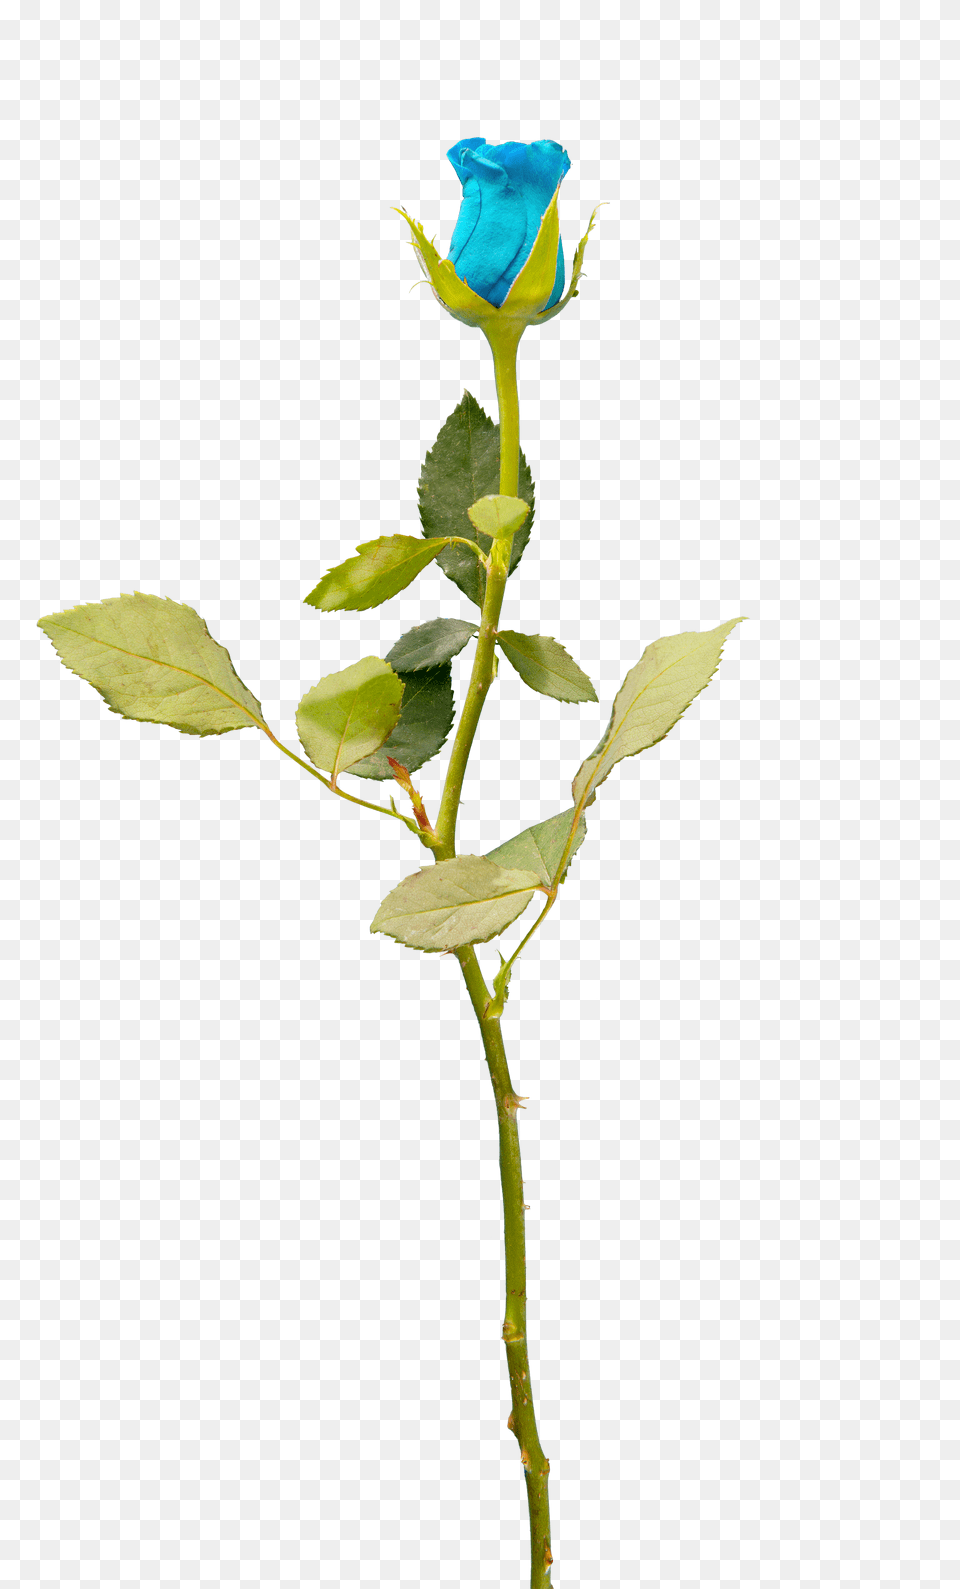 Blue Rose Overlay For U2013 Mrs Maym Creates Background Overlay Flower Plant, Acanthaceae, Bud, Sprout Free Transparent Png